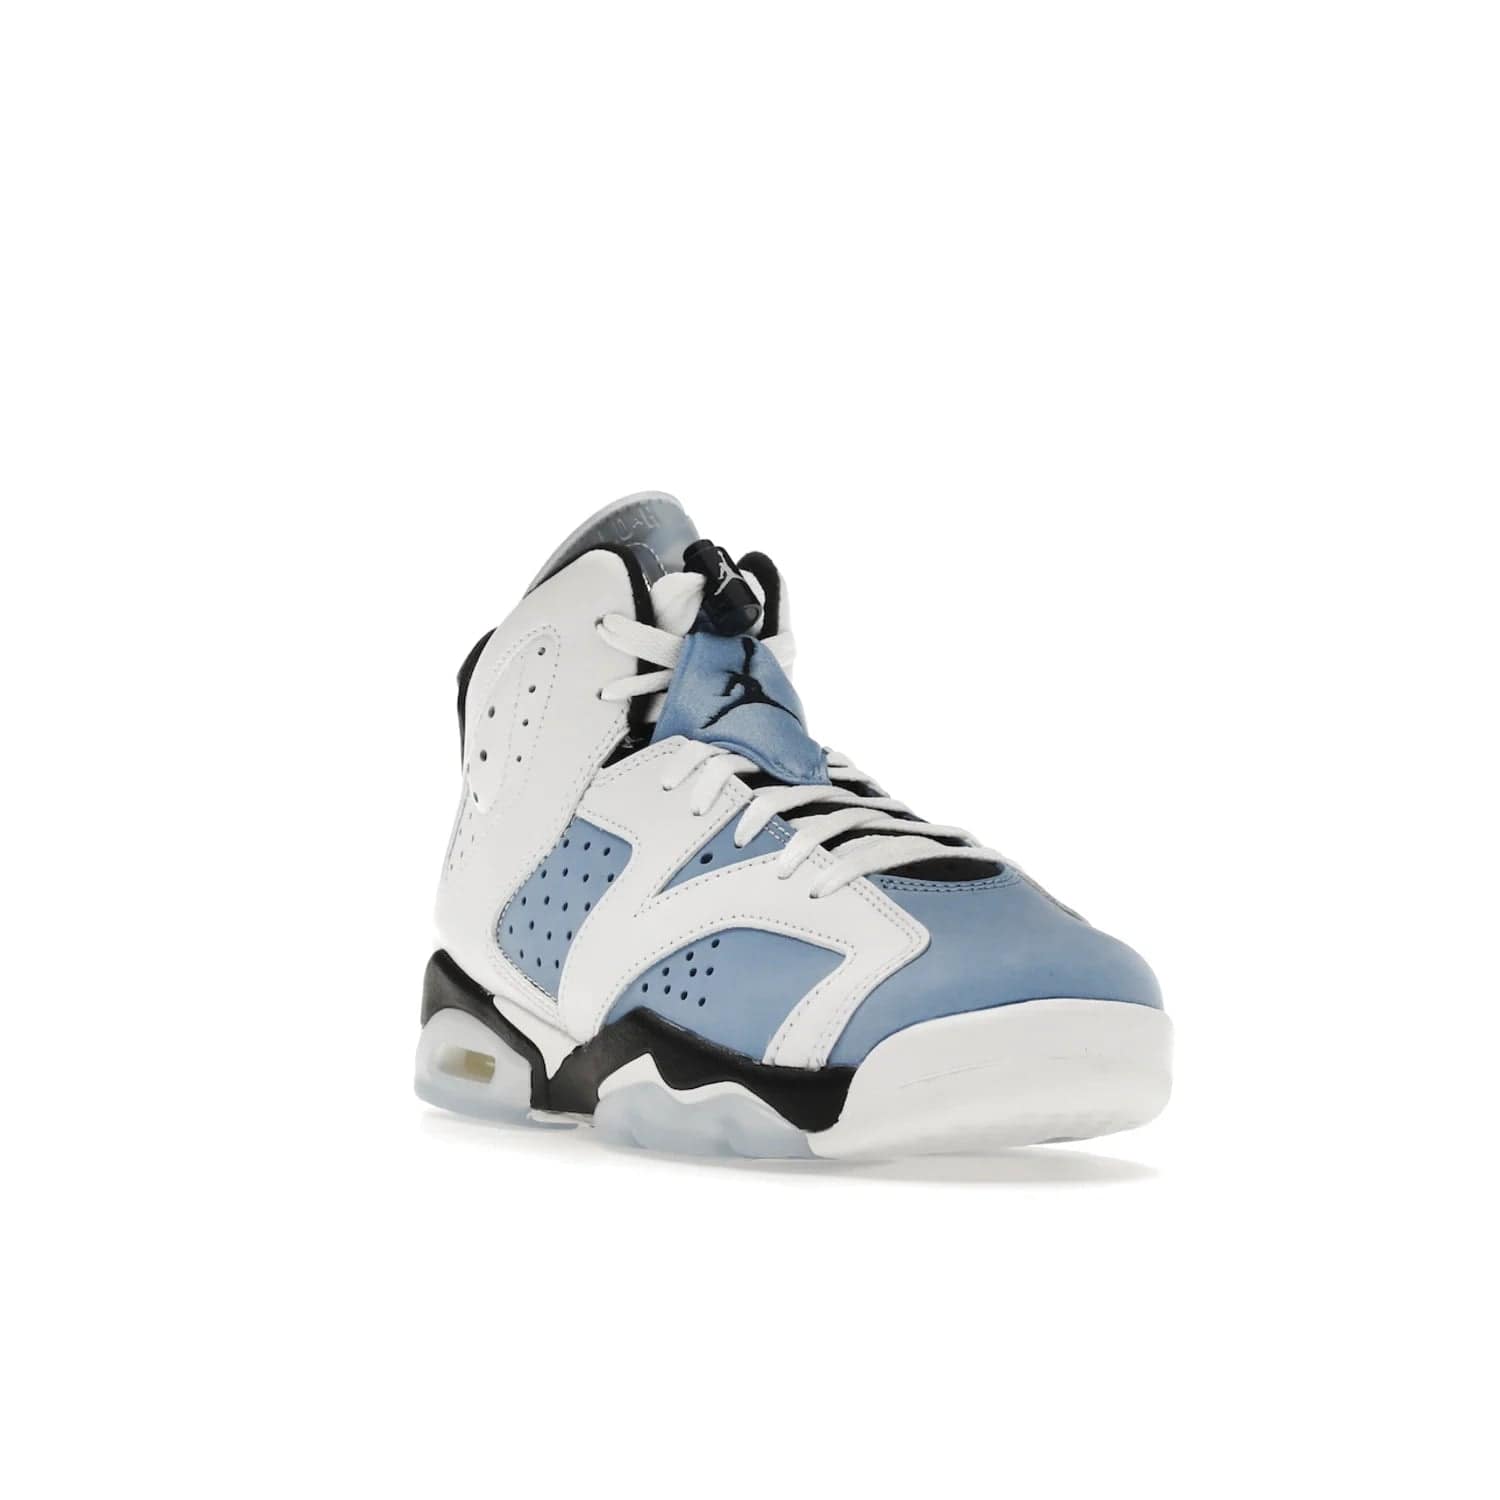 Jordan 6 Retro UNC White (GS) - Image 7 - Only at www.BallersClubKickz.com - Air Jordan 6 Retro UNC White GS: Michael Jordan alma mater, UNC Tar Heels, featuring colorway, nubuck, leather, Jumpman branding and a visible Air unit. Translucent blue/white outsole, perfect for completing sneaker rotation.